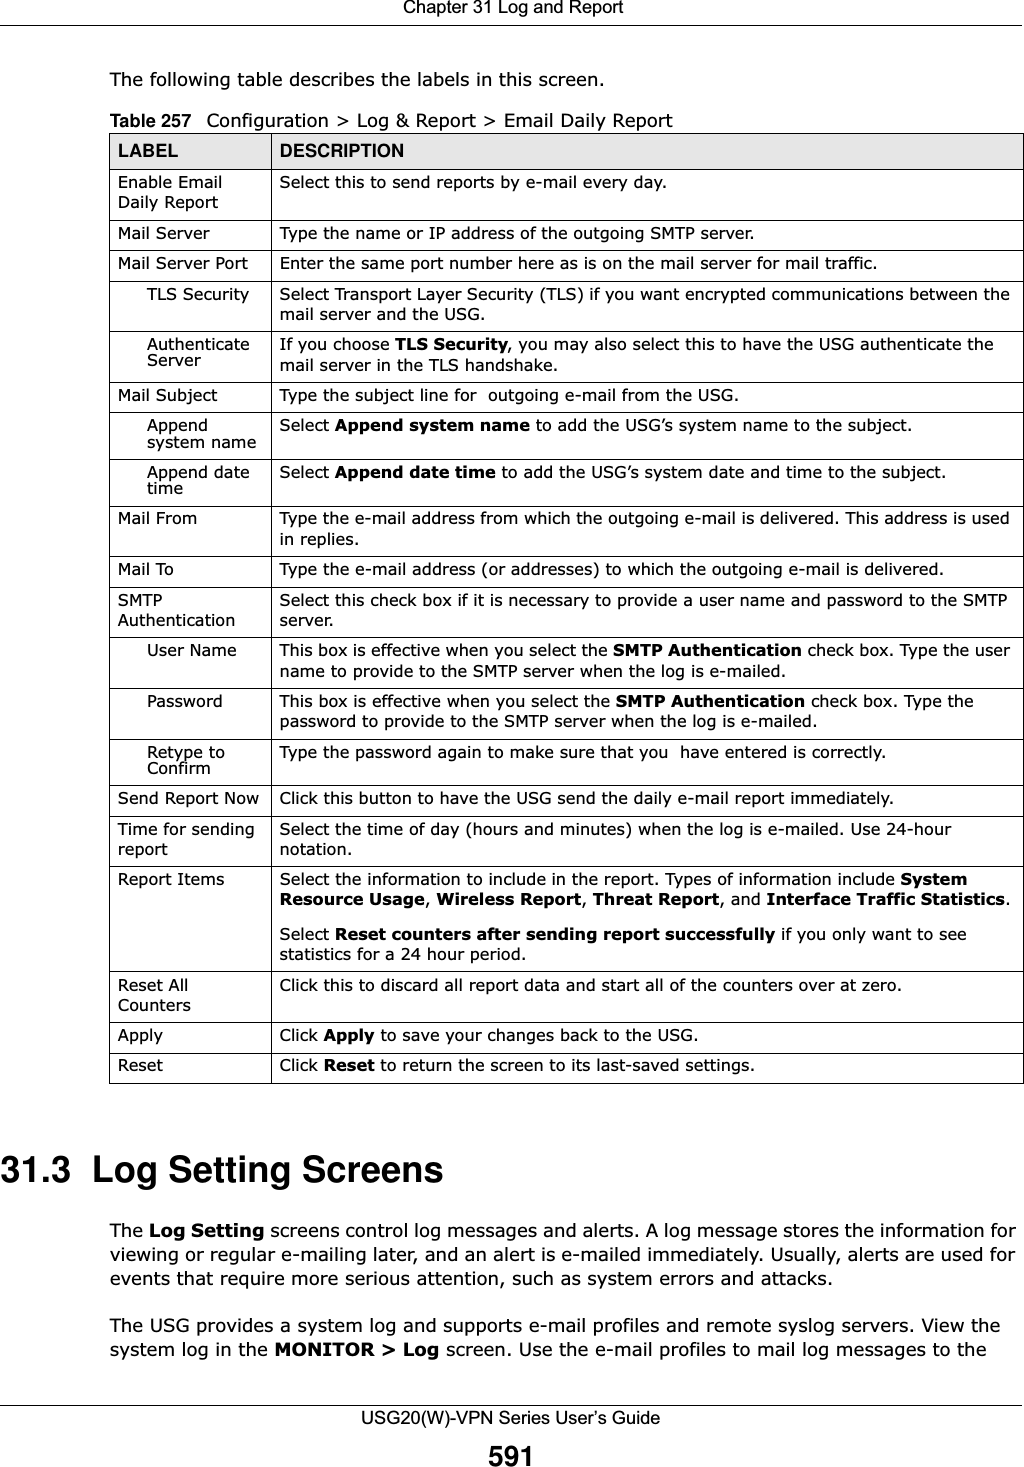  Chapter 31 Log and ReportUSG20(W)-VPN Series User’s Guide591The following table describes the labels in this screen. 31.3  Log Setting Screens The Log Setting screens control log messages and alerts. A log message stores the information for viewing or regular e-mailing later, and an alert is e-mailed immediately. Usually, alerts are used for events that require more serious attention, such as system errors and attacks.The USG provides a system log and supports e-mail profiles and remote syslog servers. View the system log in the MONITOR &gt; Log screen. Use the e-mail profiles to mail log messages to the Table 257   Configuration &gt; Log &amp; Report &gt; Email Daily ReportLABEL DESCRIPTIONEnable Email Daily ReportSelect this to send reports by e-mail every day. Mail Server Type the name or IP address of the outgoing SMTP server.Mail Server Port Enter the same port number here as is on the mail server for mail traffic.TLS Security Select Transport Layer Security (TLS) if you want encrypted communications between the mail server and the USG. Authenticate Server If you choose TLS Security, you may also select this to have the USG authenticate the mail server in the TLS handshake.Mail Subject Type the subject line for  outgoing e-mail from the USG. Append system name Select Append system name to add the USG’s system name to the subject. Append date time Select Append date time to add the USG’s system date and time to the subject.Mail From Type the e-mail address from which the outgoing e-mail is delivered. This address is used in replies.Mail To Type the e-mail address (or addresses) to which the outgoing e-mail is delivered.SMTP AuthenticationSelect this check box if it is necessary to provide a user name and password to the SMTP server.User Name This box is effective when you select the SMTP Authentication check box. Type the user name to provide to the SMTP server when the log is e-mailed.Password This box is effective when you select the SMTP Authentication check box. Type the password to provide to the SMTP server when the log is e-mailed.Retype to Confirm Type the password again to make sure that you  have entered is correctly.Send Report Now Click this button to have the USG send the daily e-mail report immediately.Time for sending reportSelect the time of day (hours and minutes) when the log is e-mailed. Use 24-hour notation.Report Items Select the information to include in the report. Types of information include System Resource Usage, Wireless Report, Threat Report, and Interface Traffic Statistics.Select Reset counters after sending report successfully if you only want to see statistics for a 24 hour period.Reset All CountersClick this to discard all report data and start all of the counters over at zero. Apply Click Apply to save your changes back to the USG.Reset Click Reset to return the screen to its last-saved settings. 